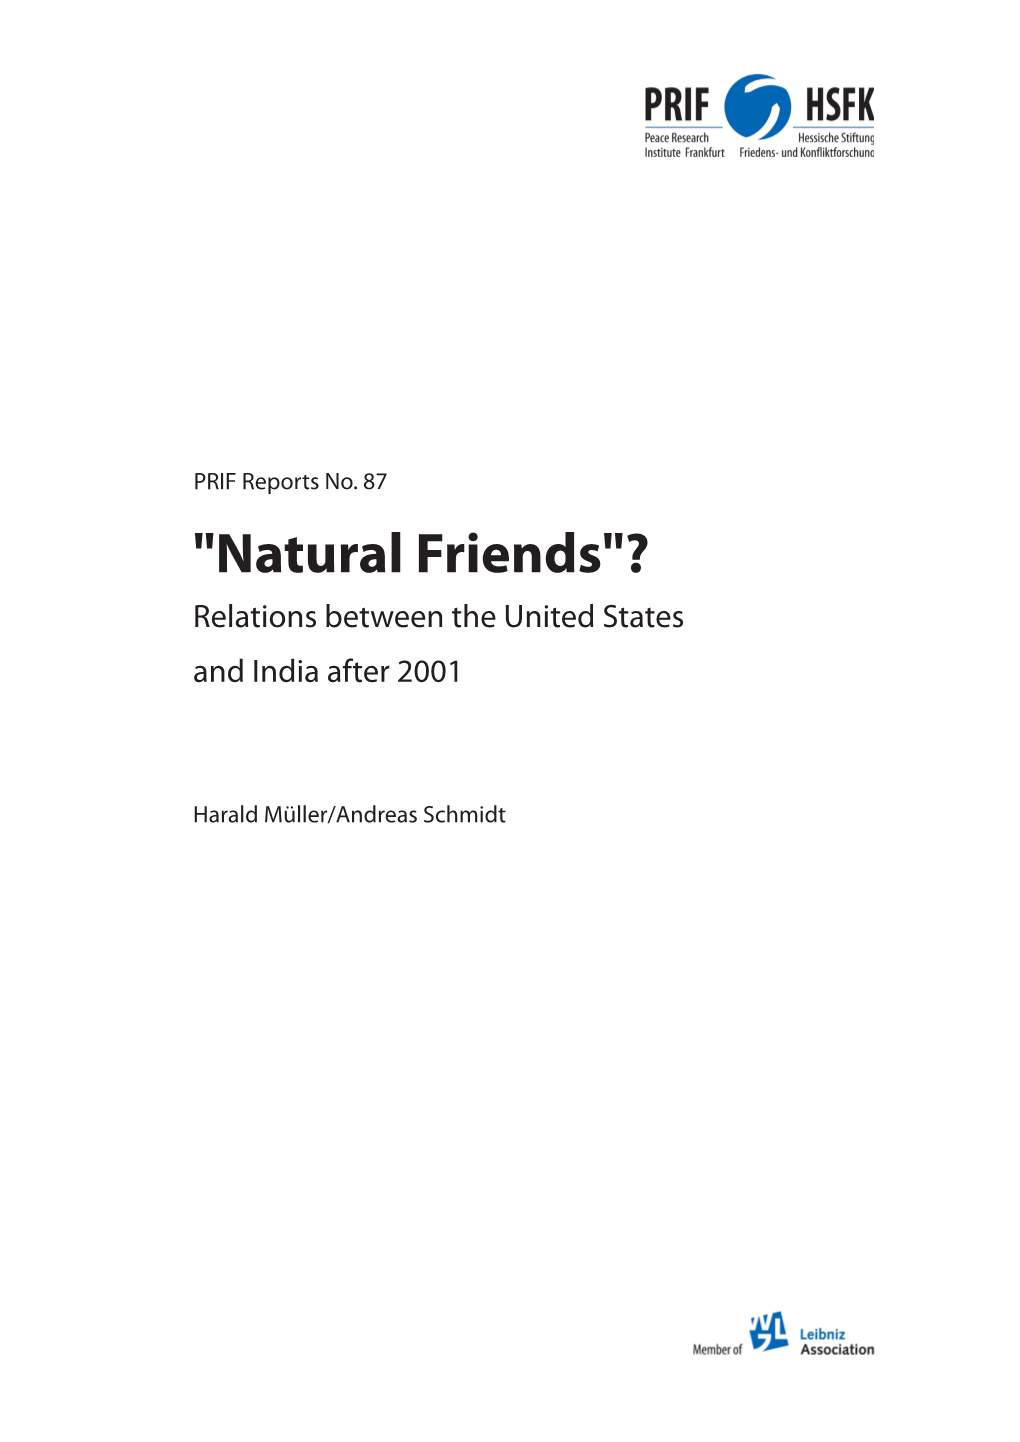 "Natural Friends"? Relations Between the United States and India After 2001